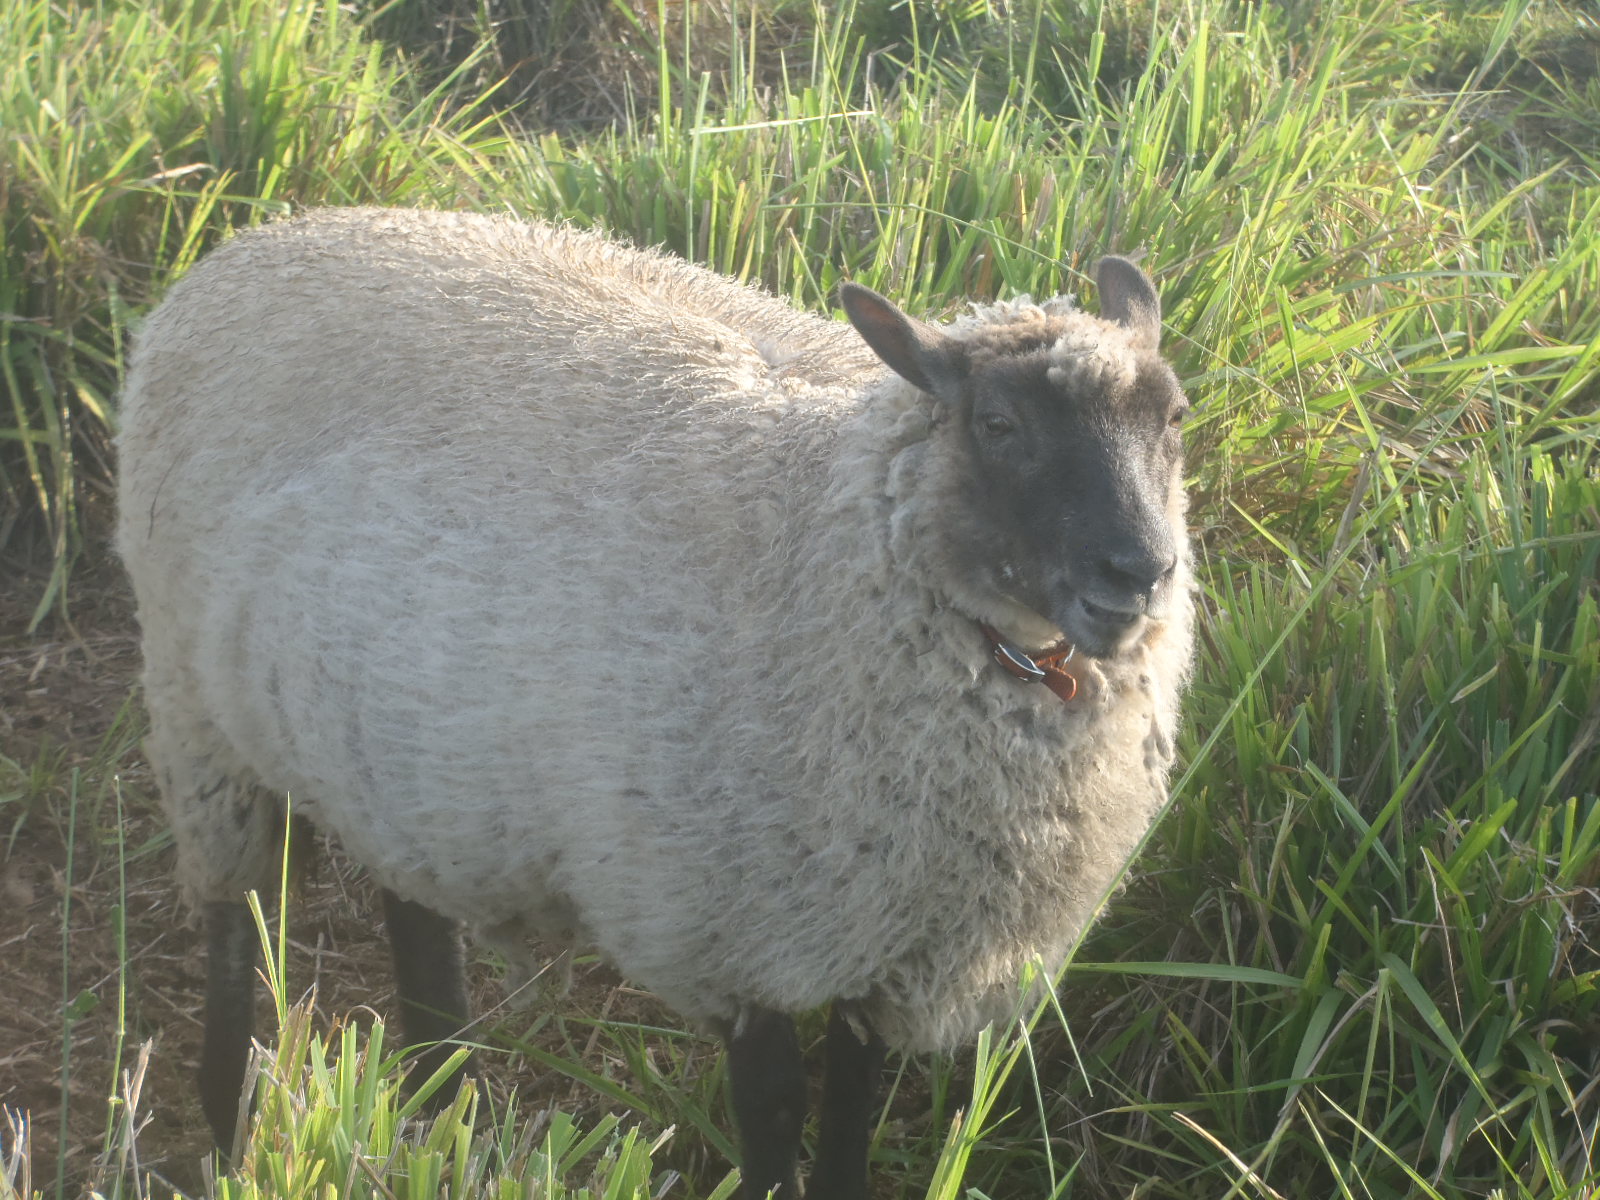 A photo of one of our sheep before she was sheared